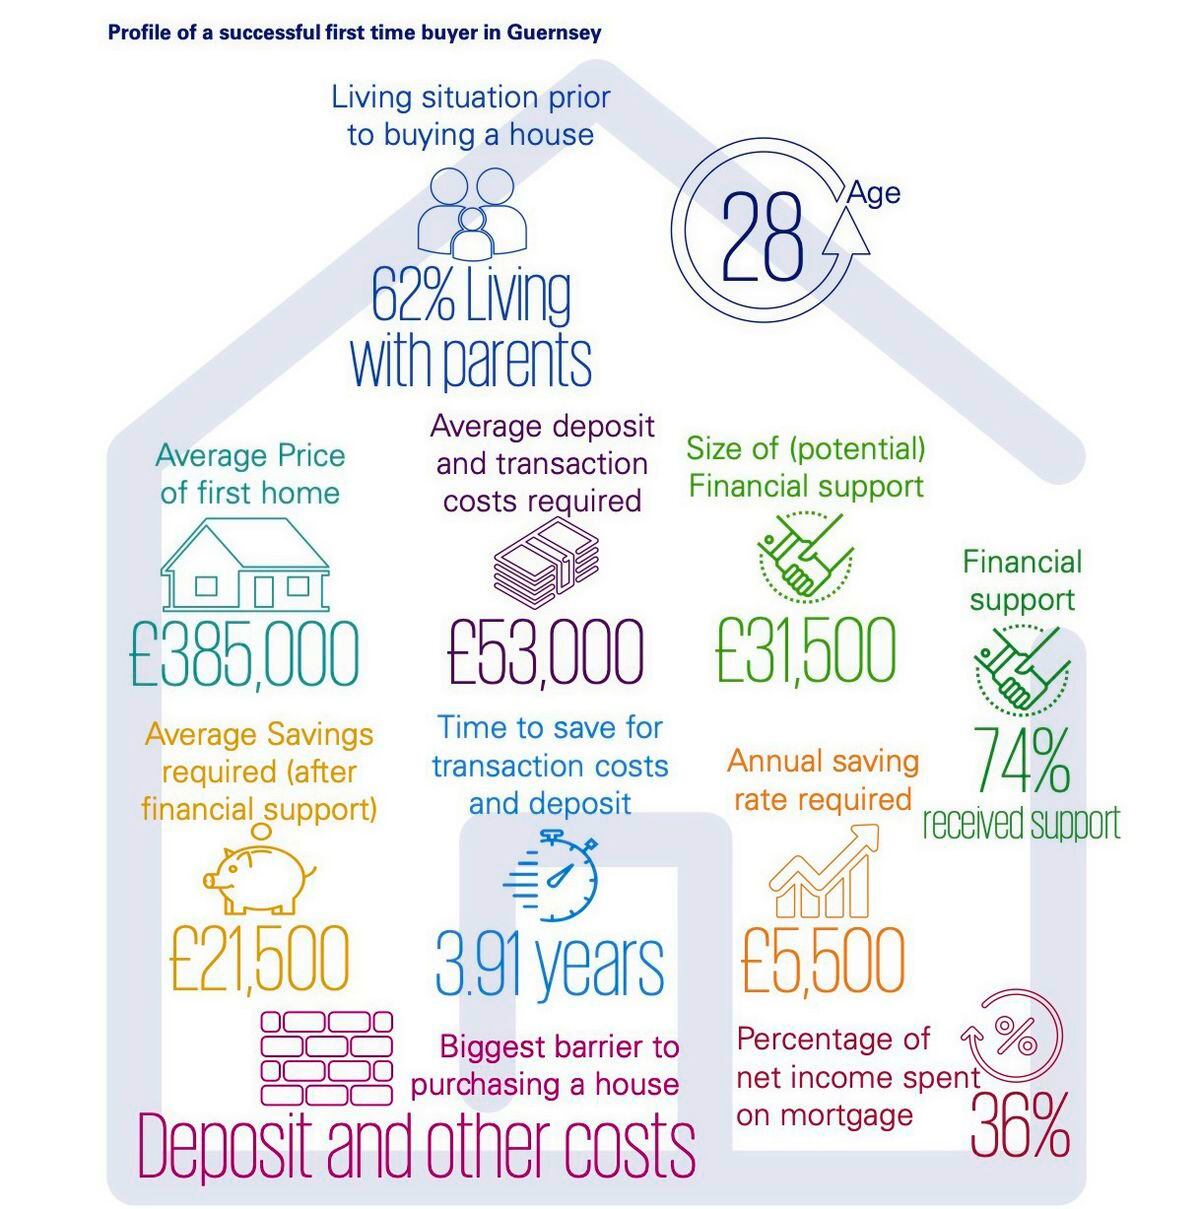 This extract from KPMG’s housing report gives a profile of a successful first-time buyerin Guernsey. (29208805)